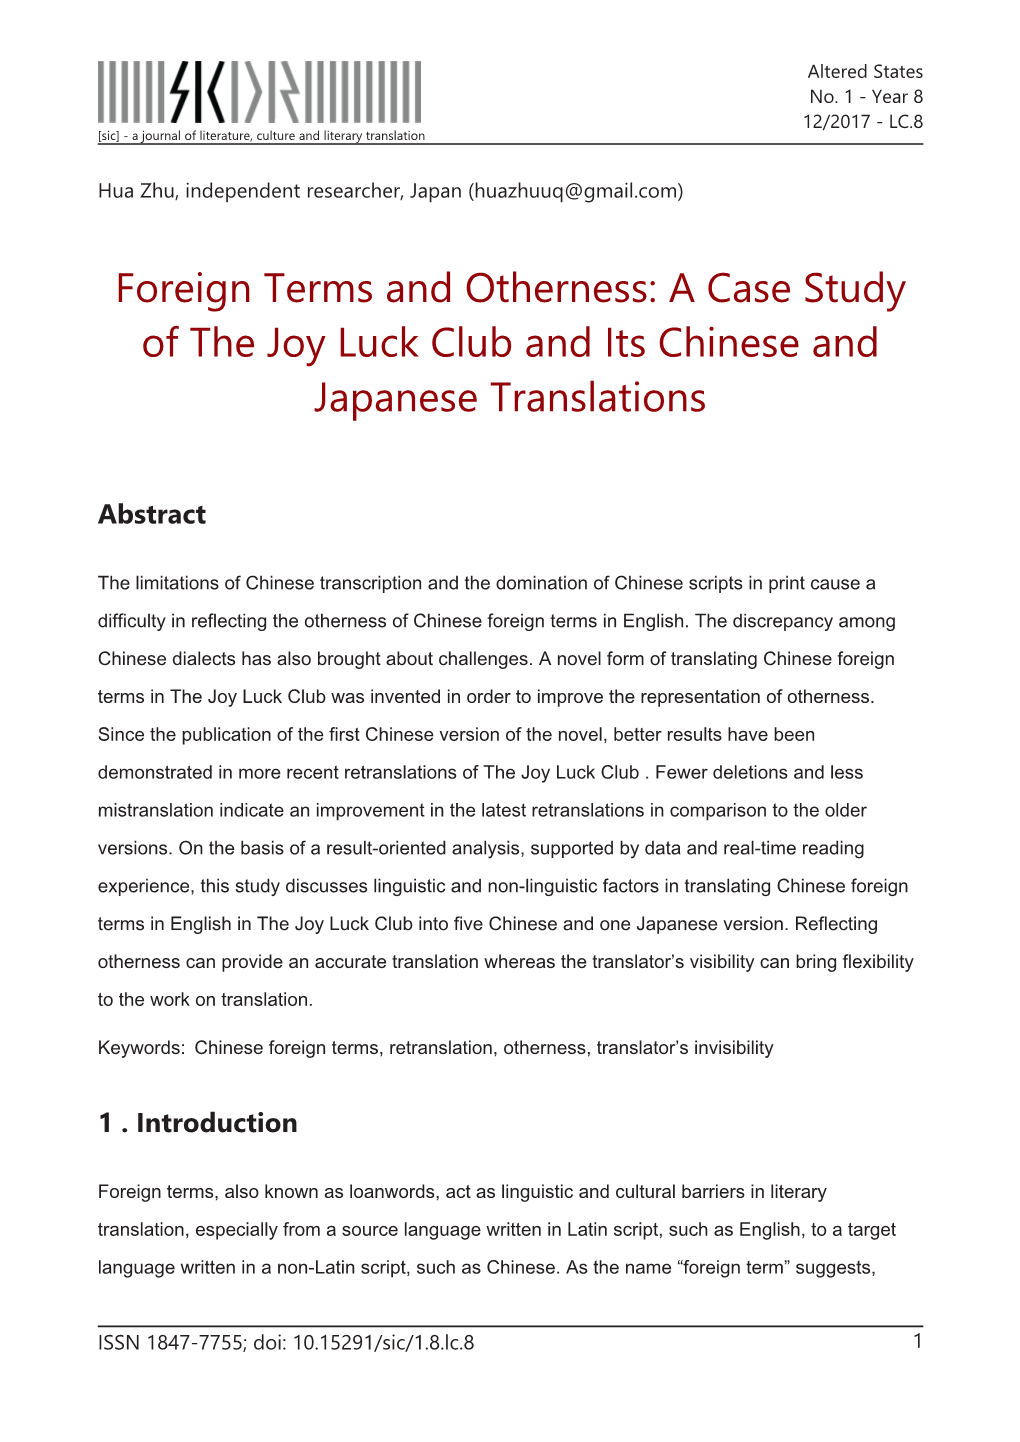 Foreign Terms and Otherness: a Case Study of the Joy Luck Club and Its Chinese and Japanese Translations